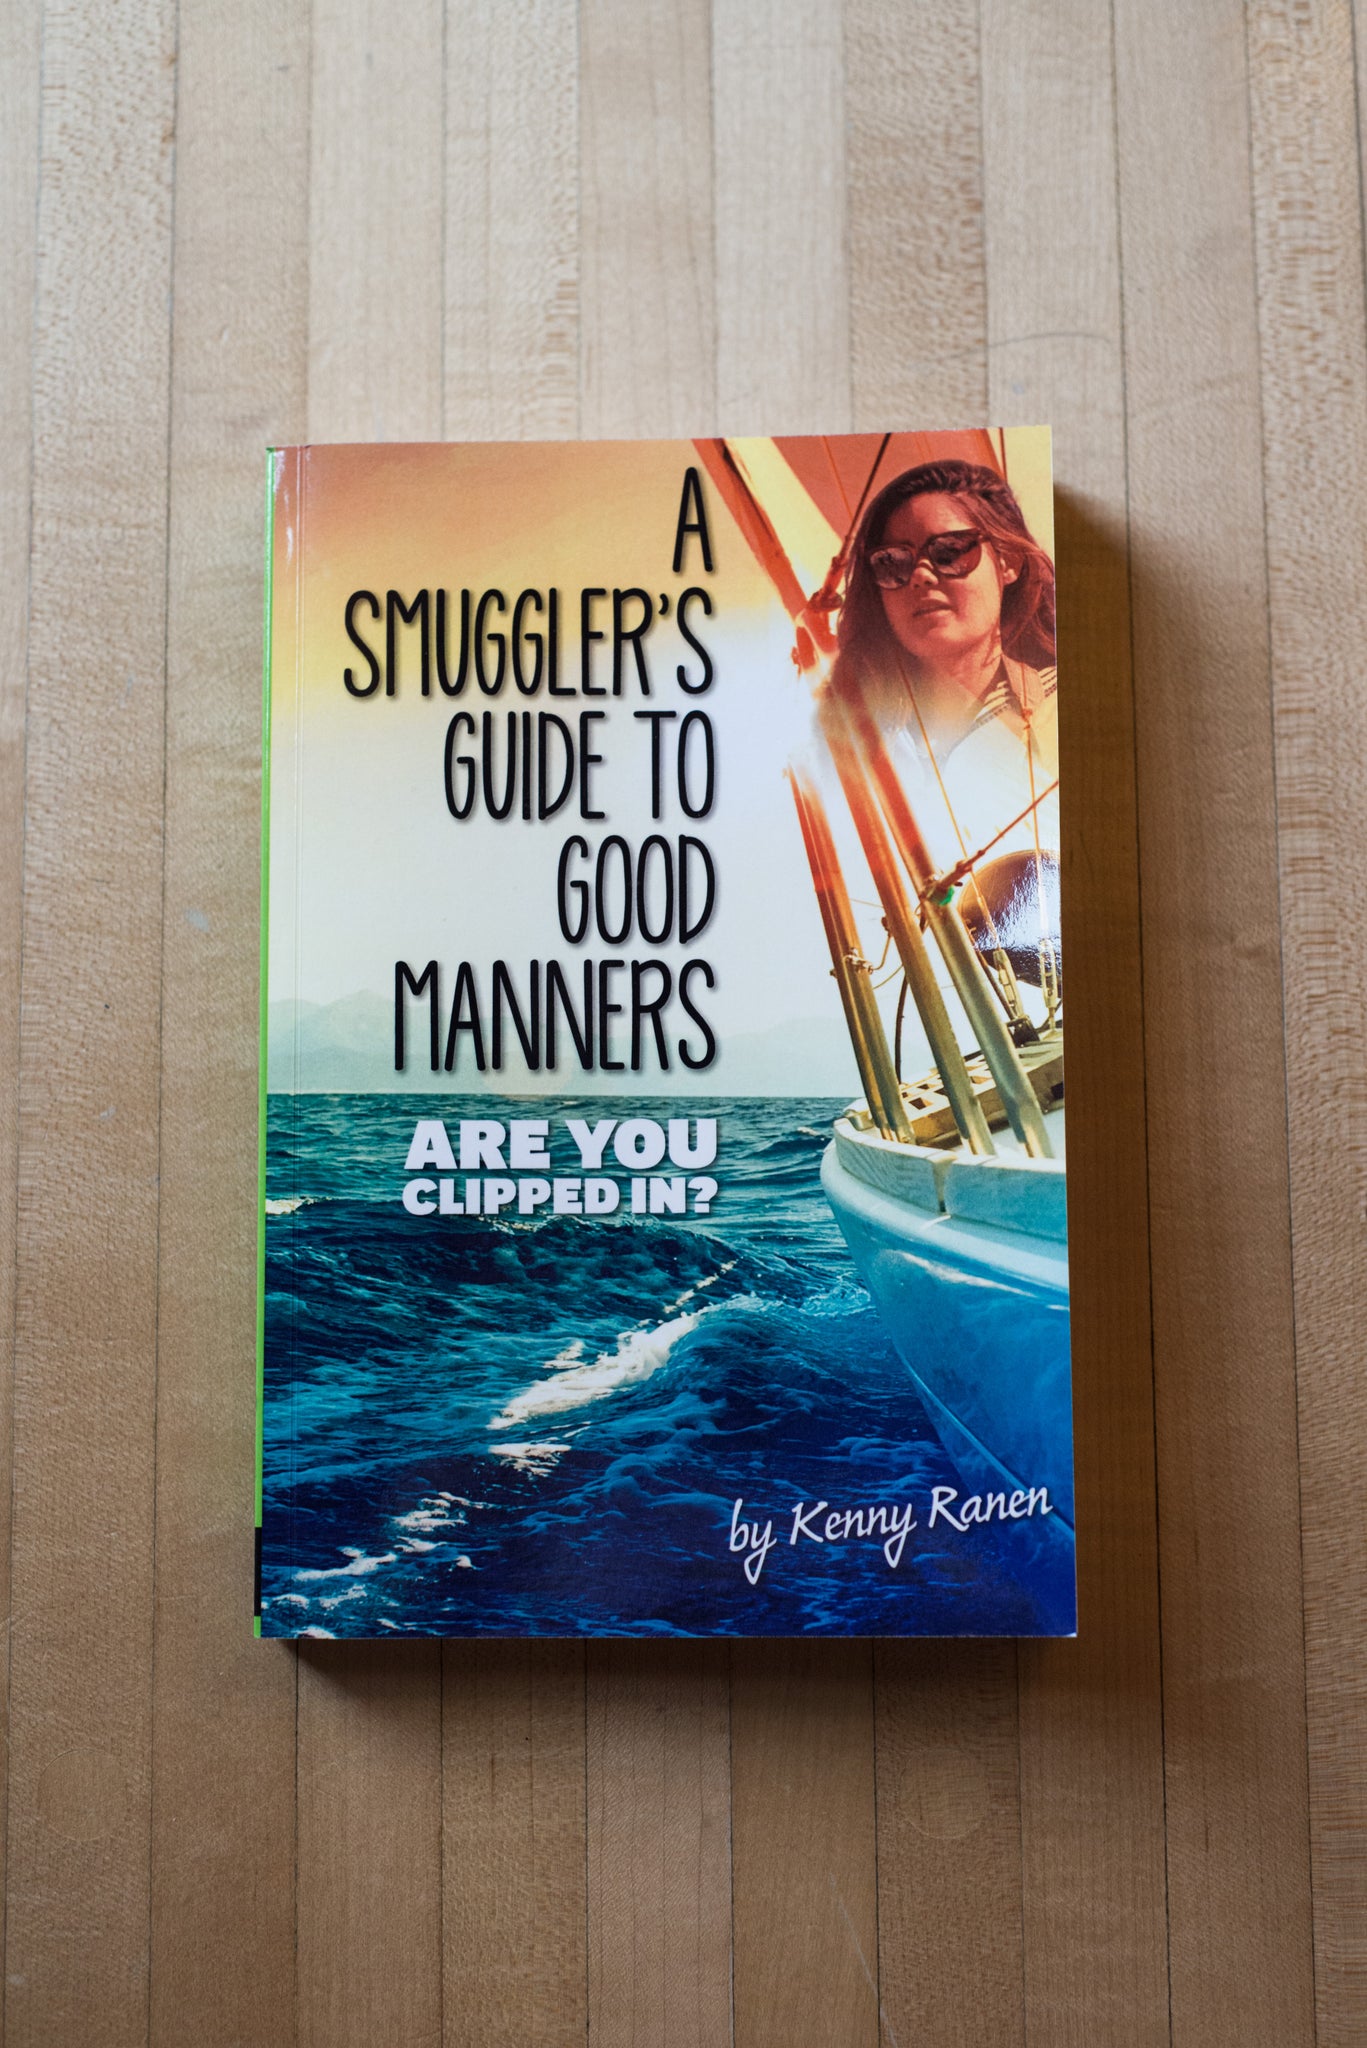 Aldea Coffee Favorite Books - Smuggler's Guide To Good Manners - Kenny Ranen